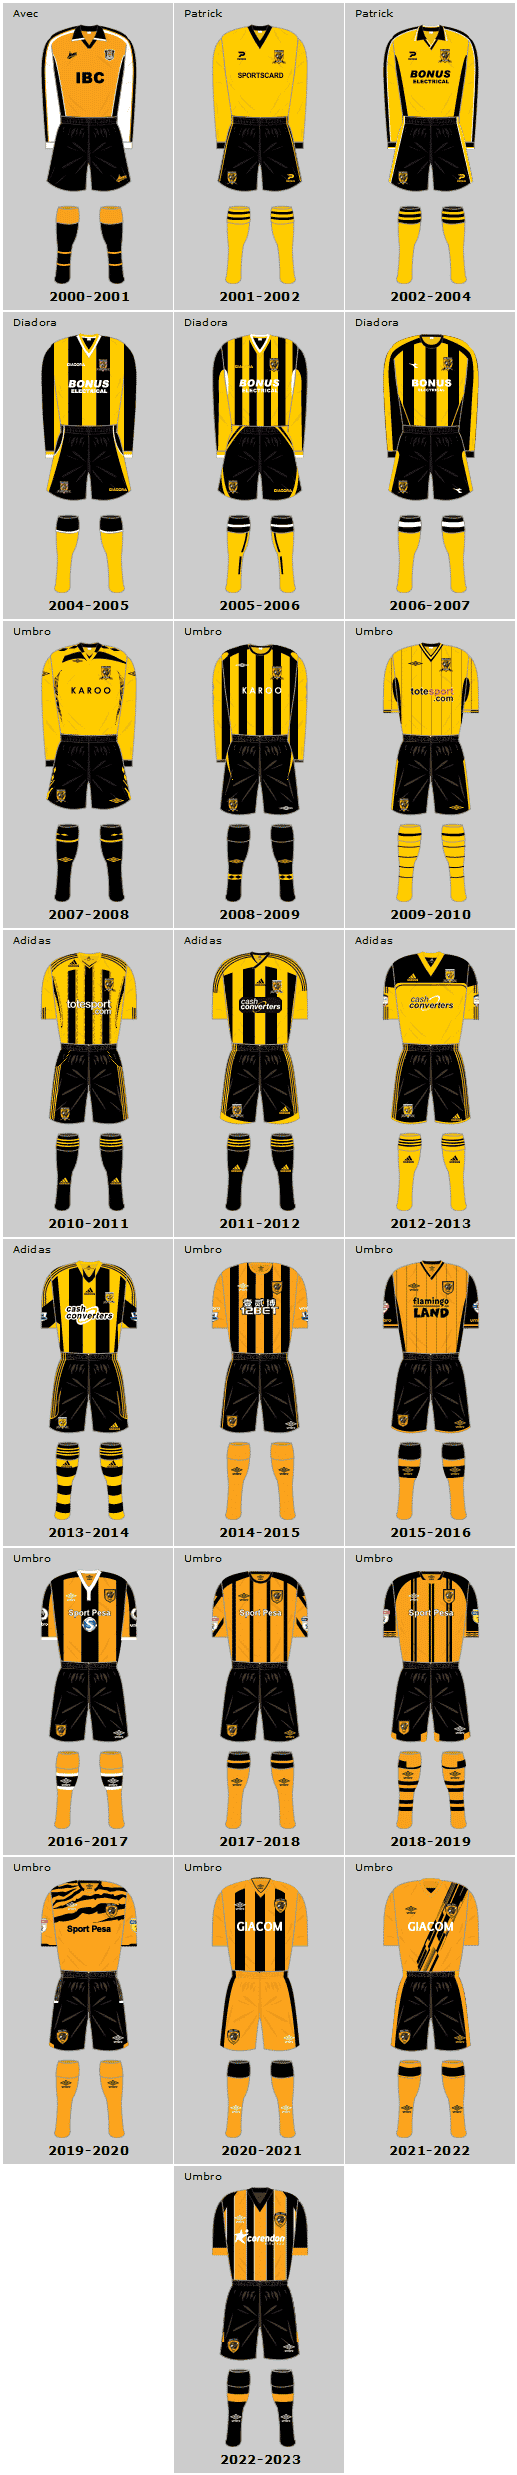 Hull City AFC 21st Century Home Playing Kits